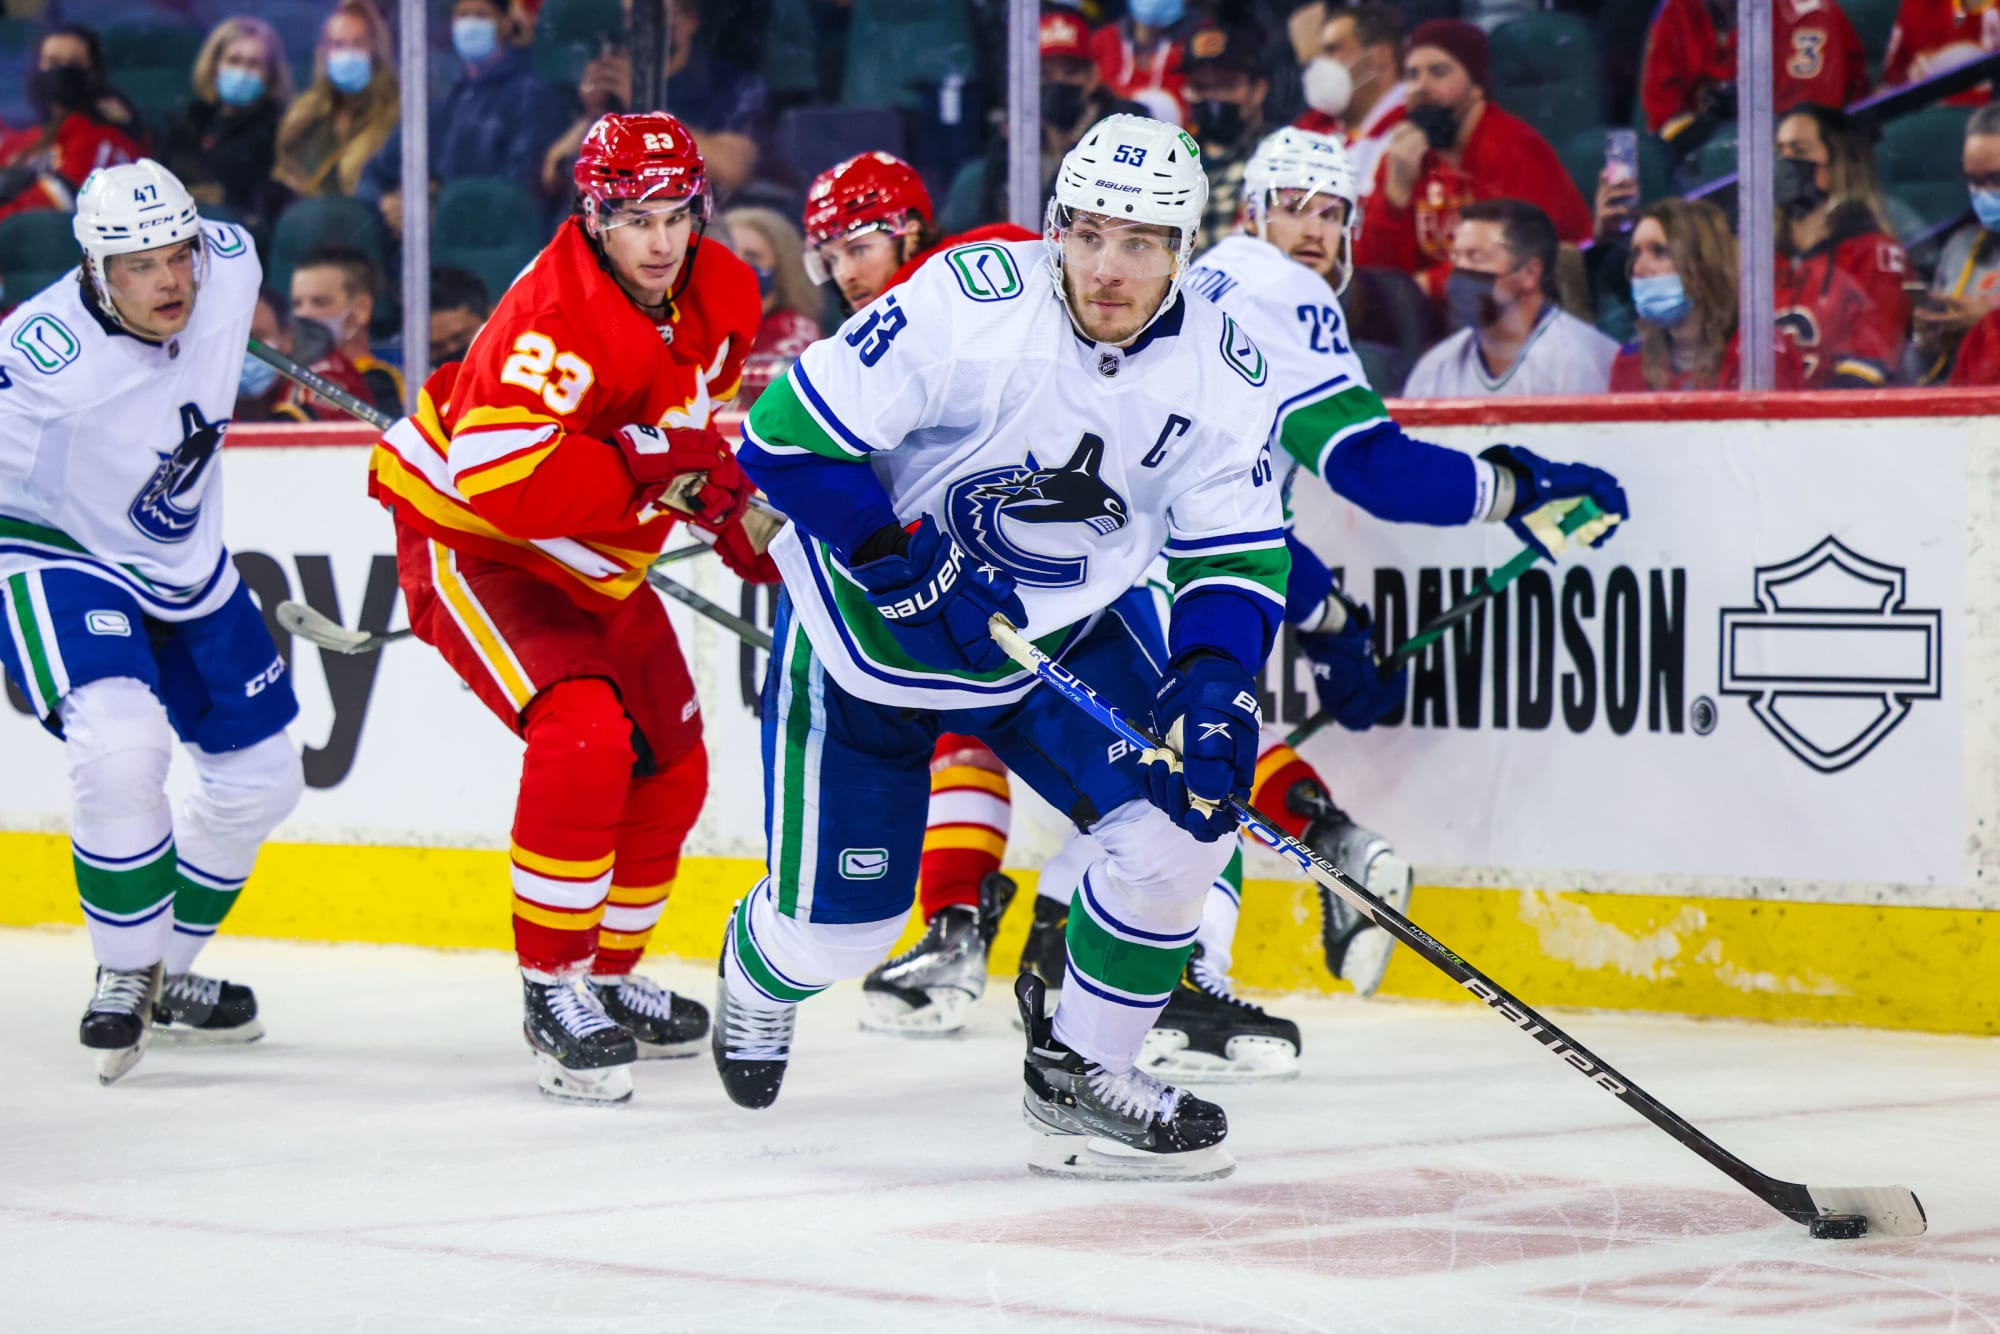 Gameday Preview: Canucks vs. Flames (February 24th)